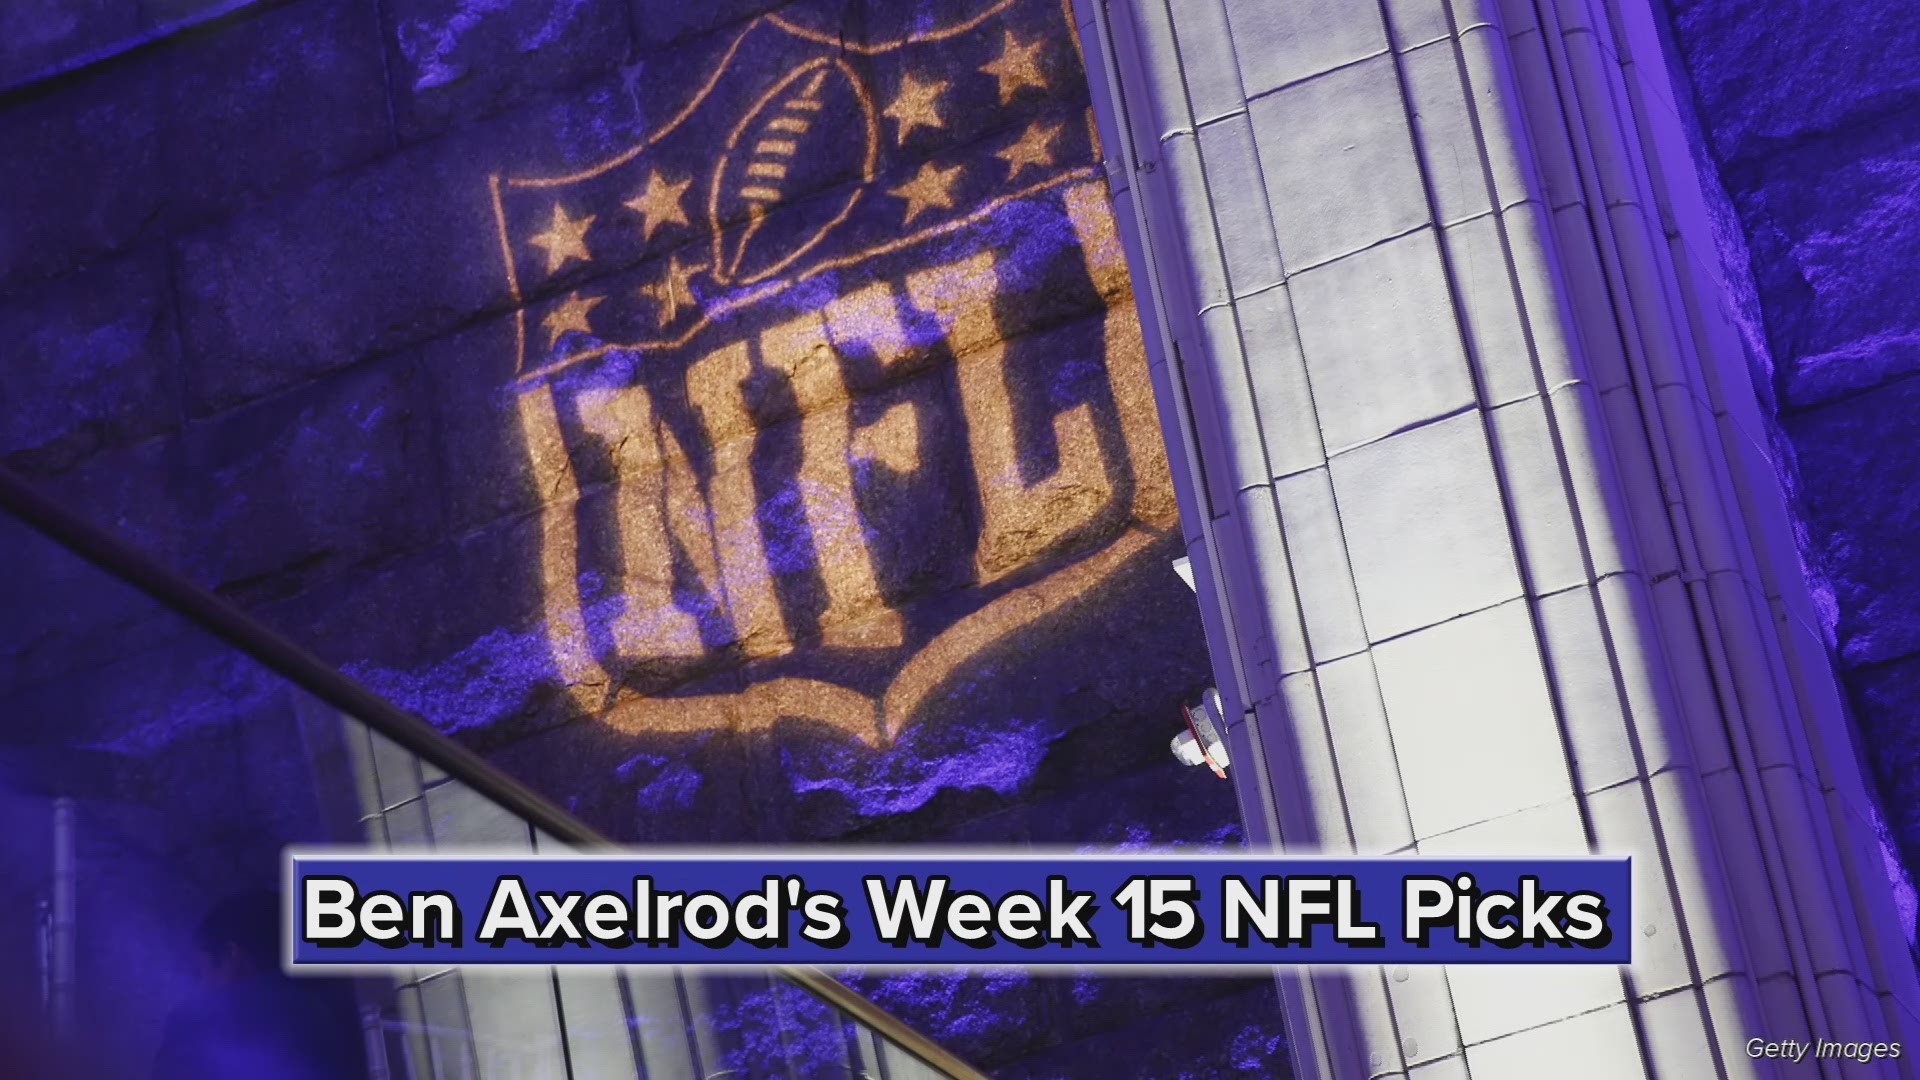 WKYC.com's Ben Axelrod makes his picks against the spread for Week 15 of the NFL season.